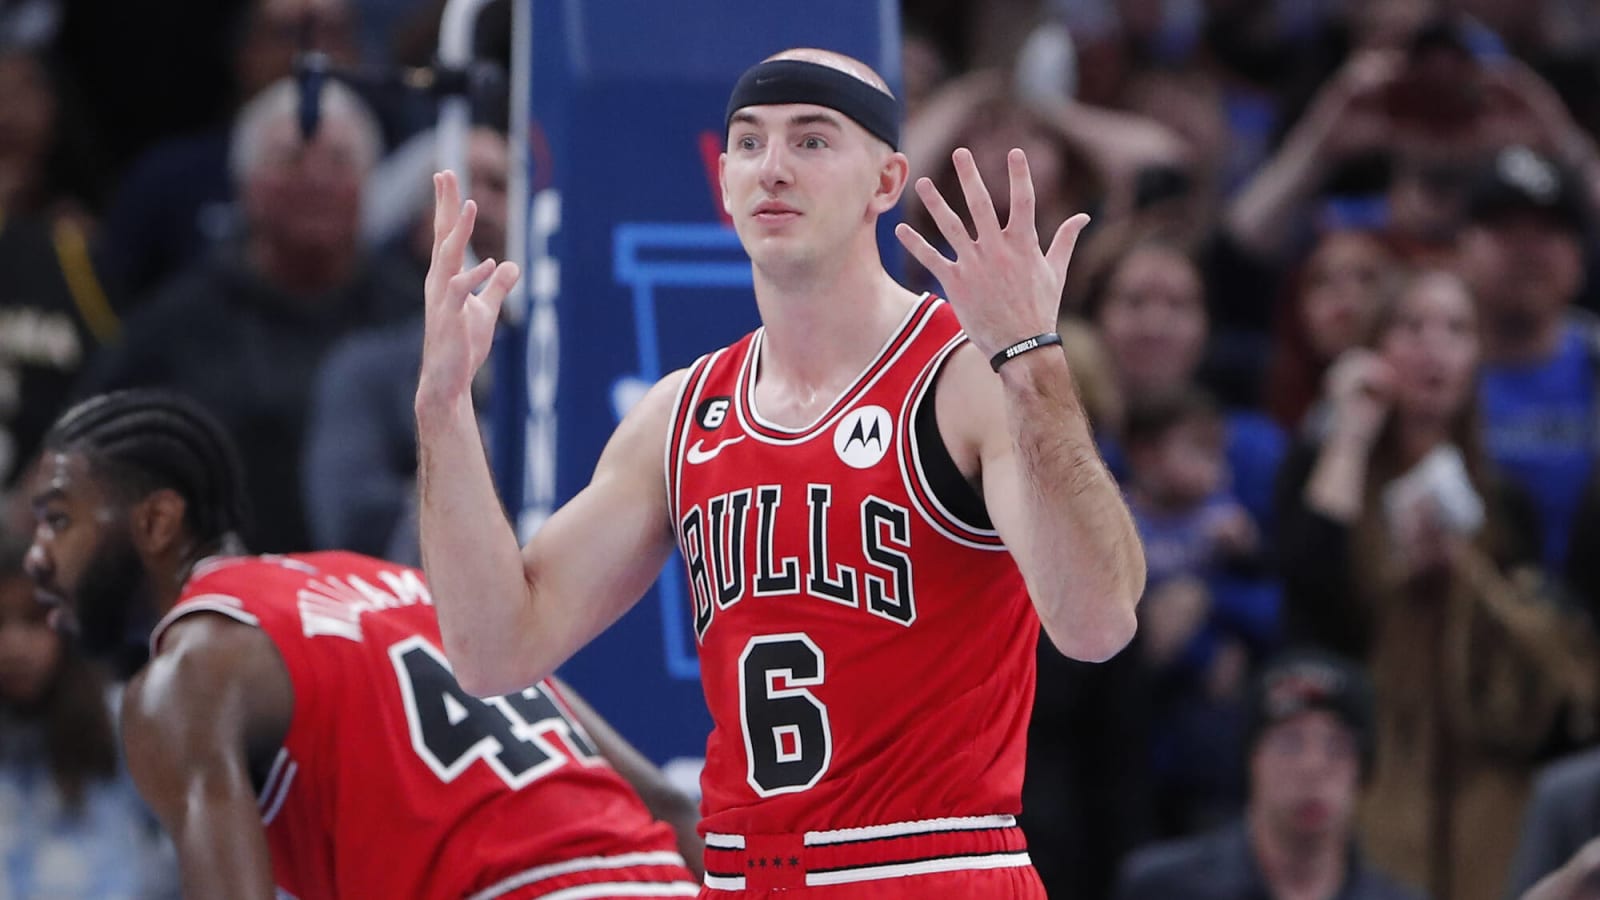 NBA Fans React To Alex Caruso’s All-Time Bulls Starting Five: “Not The Same Without Dennis Rodman”